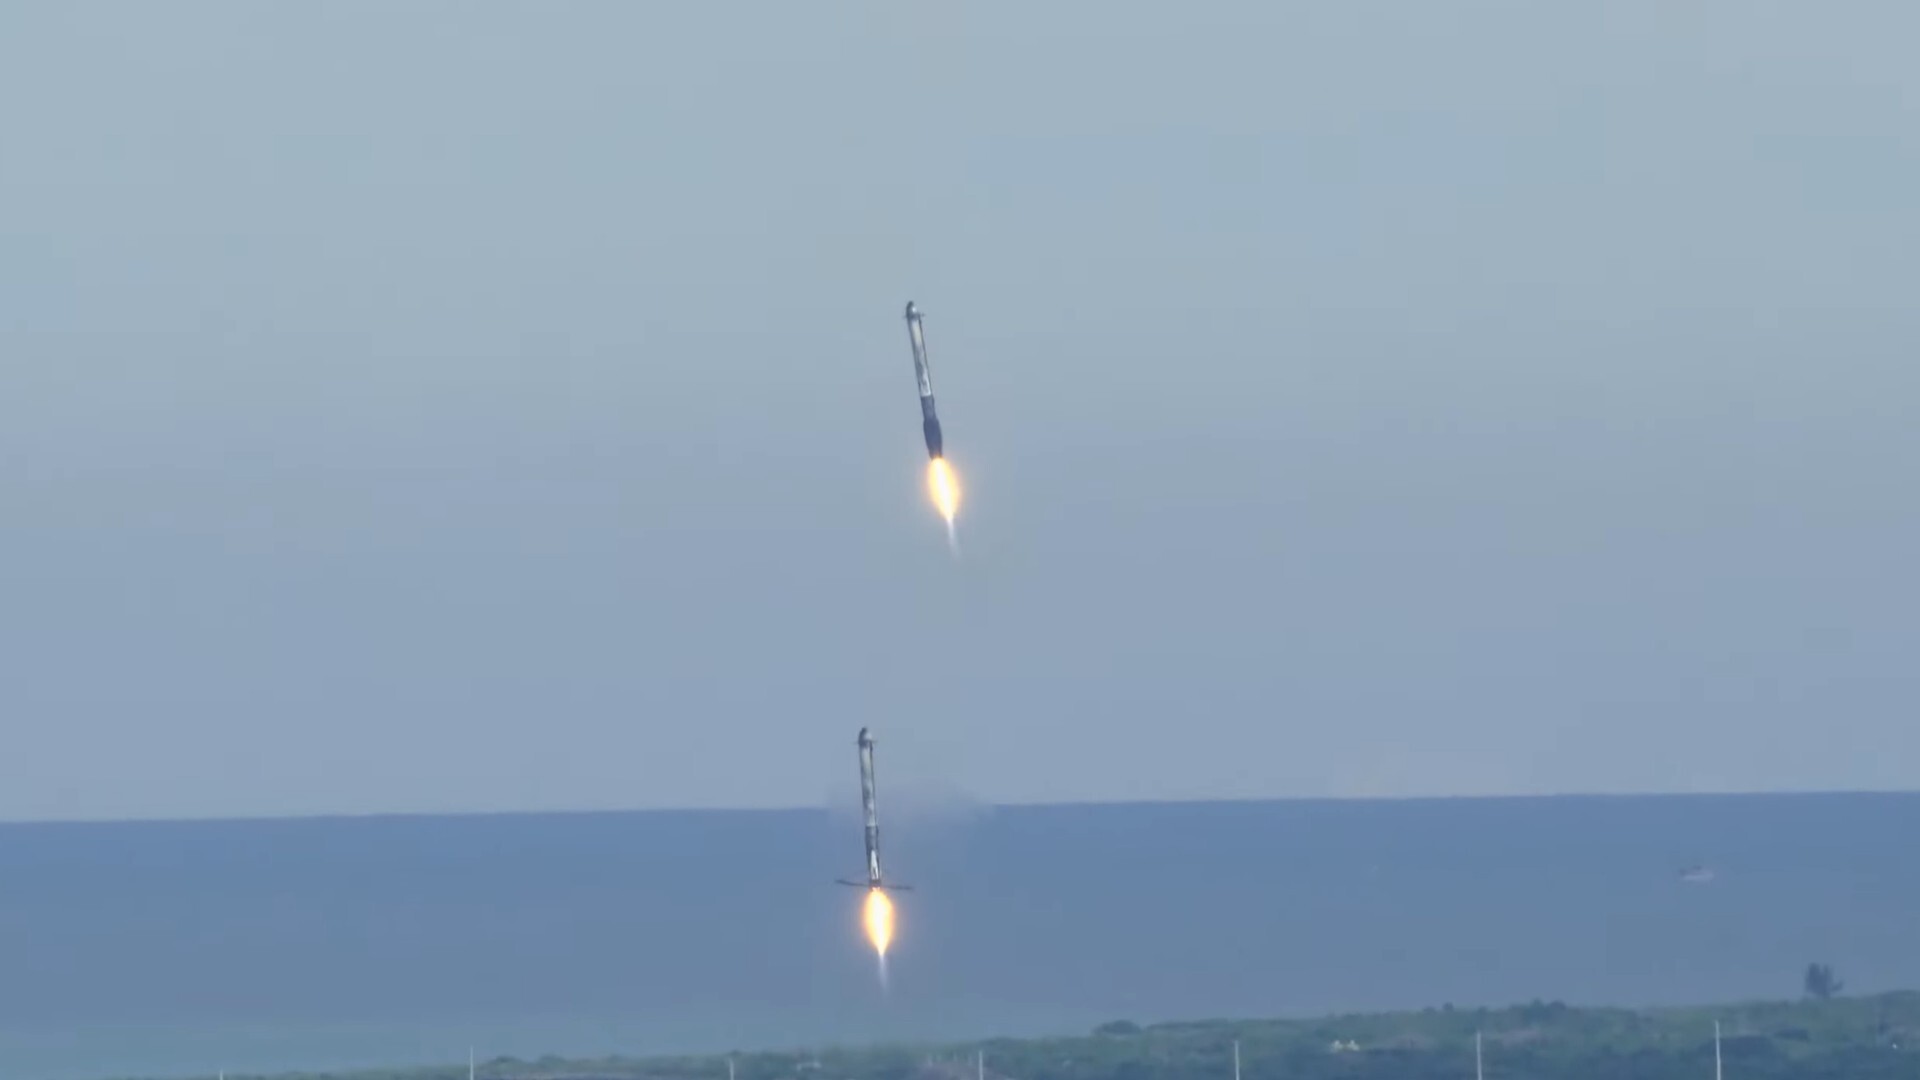 two rockets come down for a landing with the ocean in the background